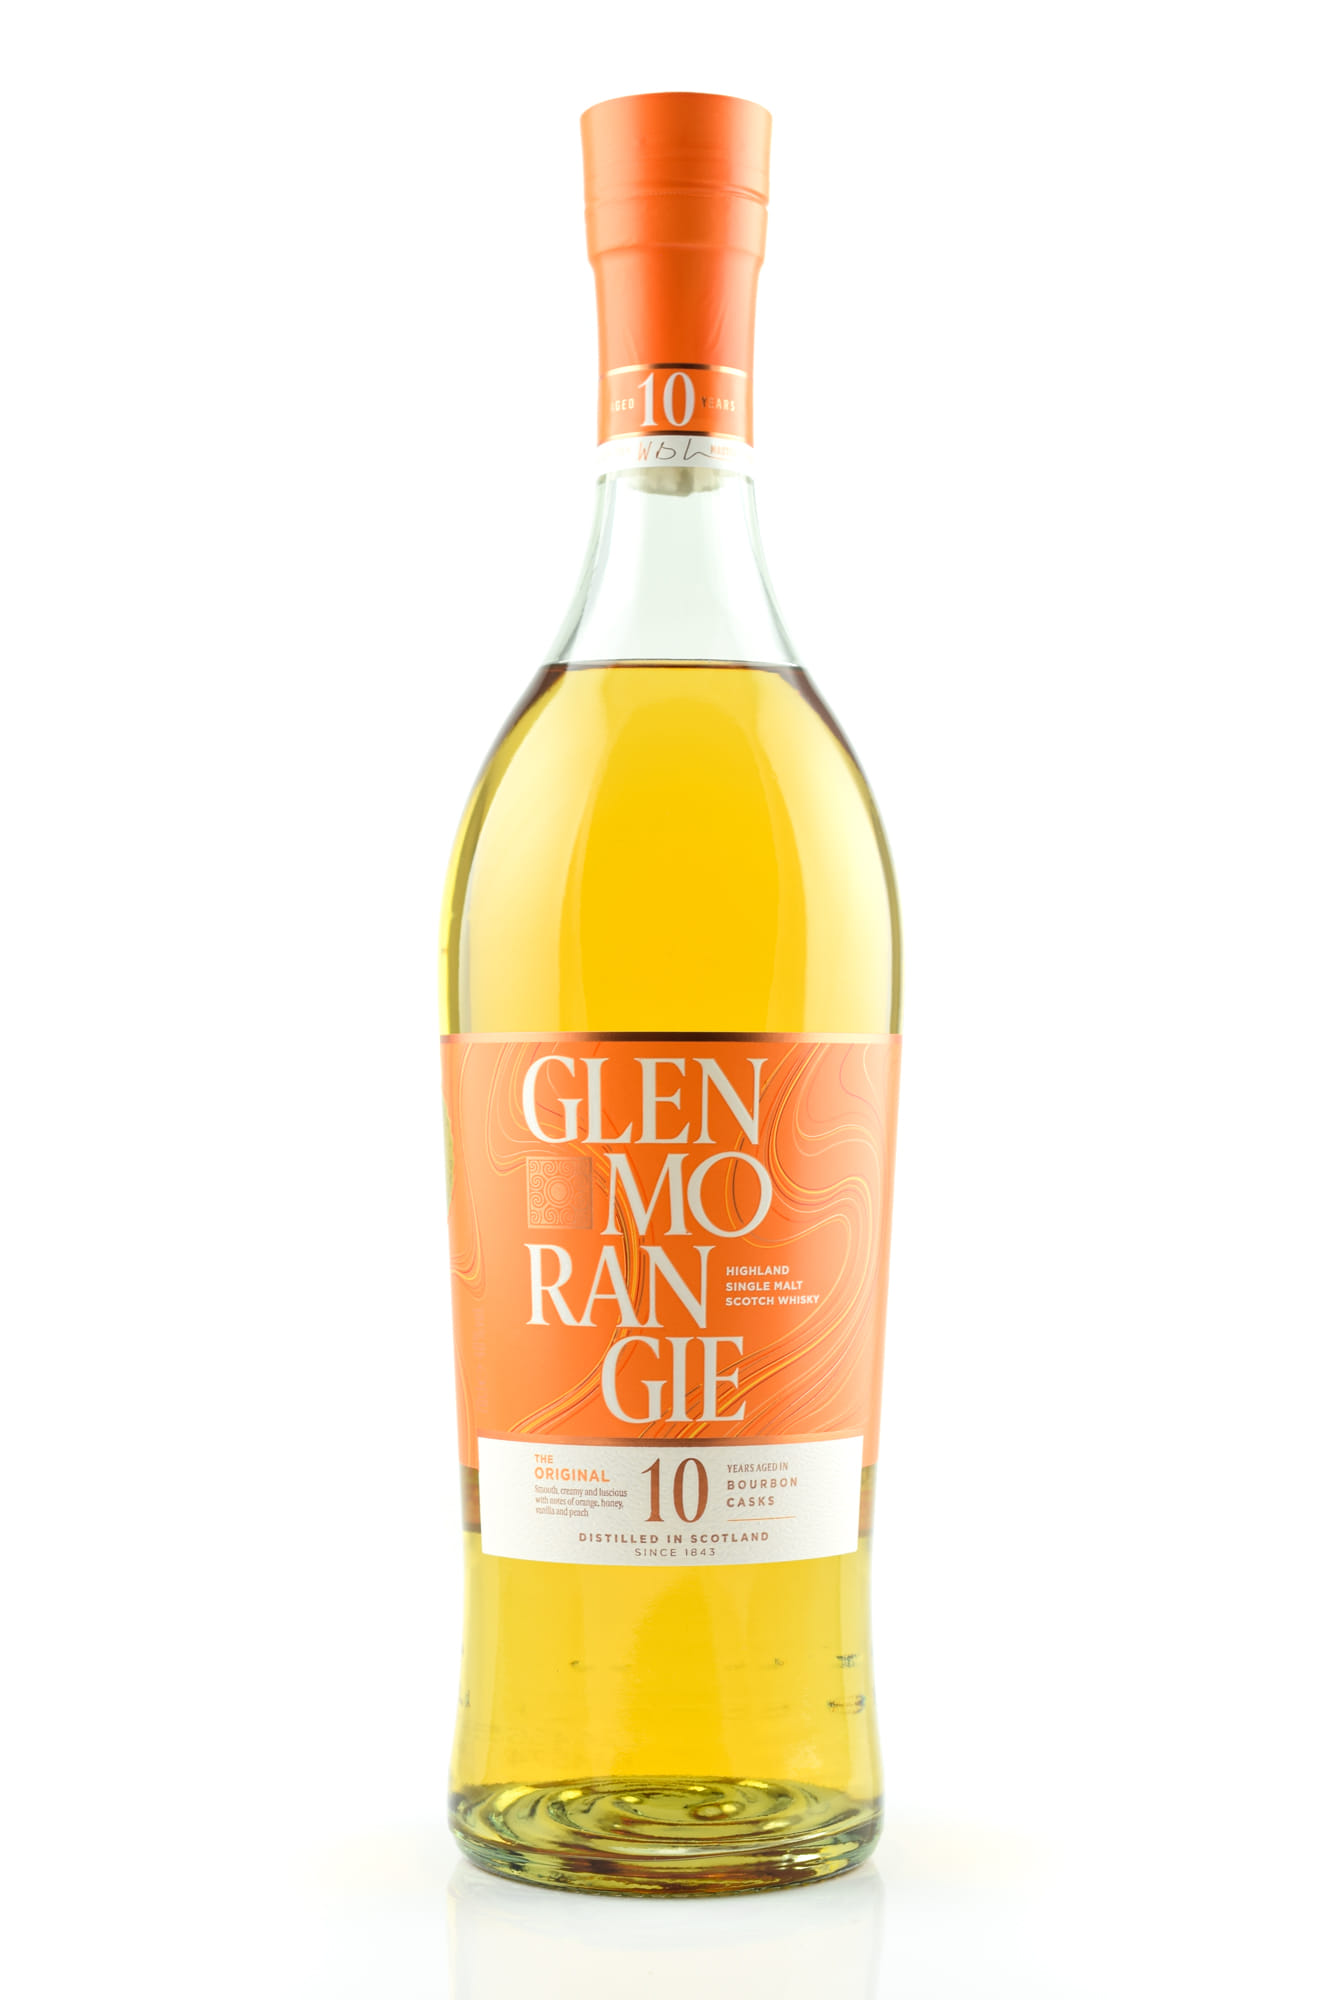 old year Glenmorangie 10 The Home of Original Malts Home of Malts now! explore >> at |